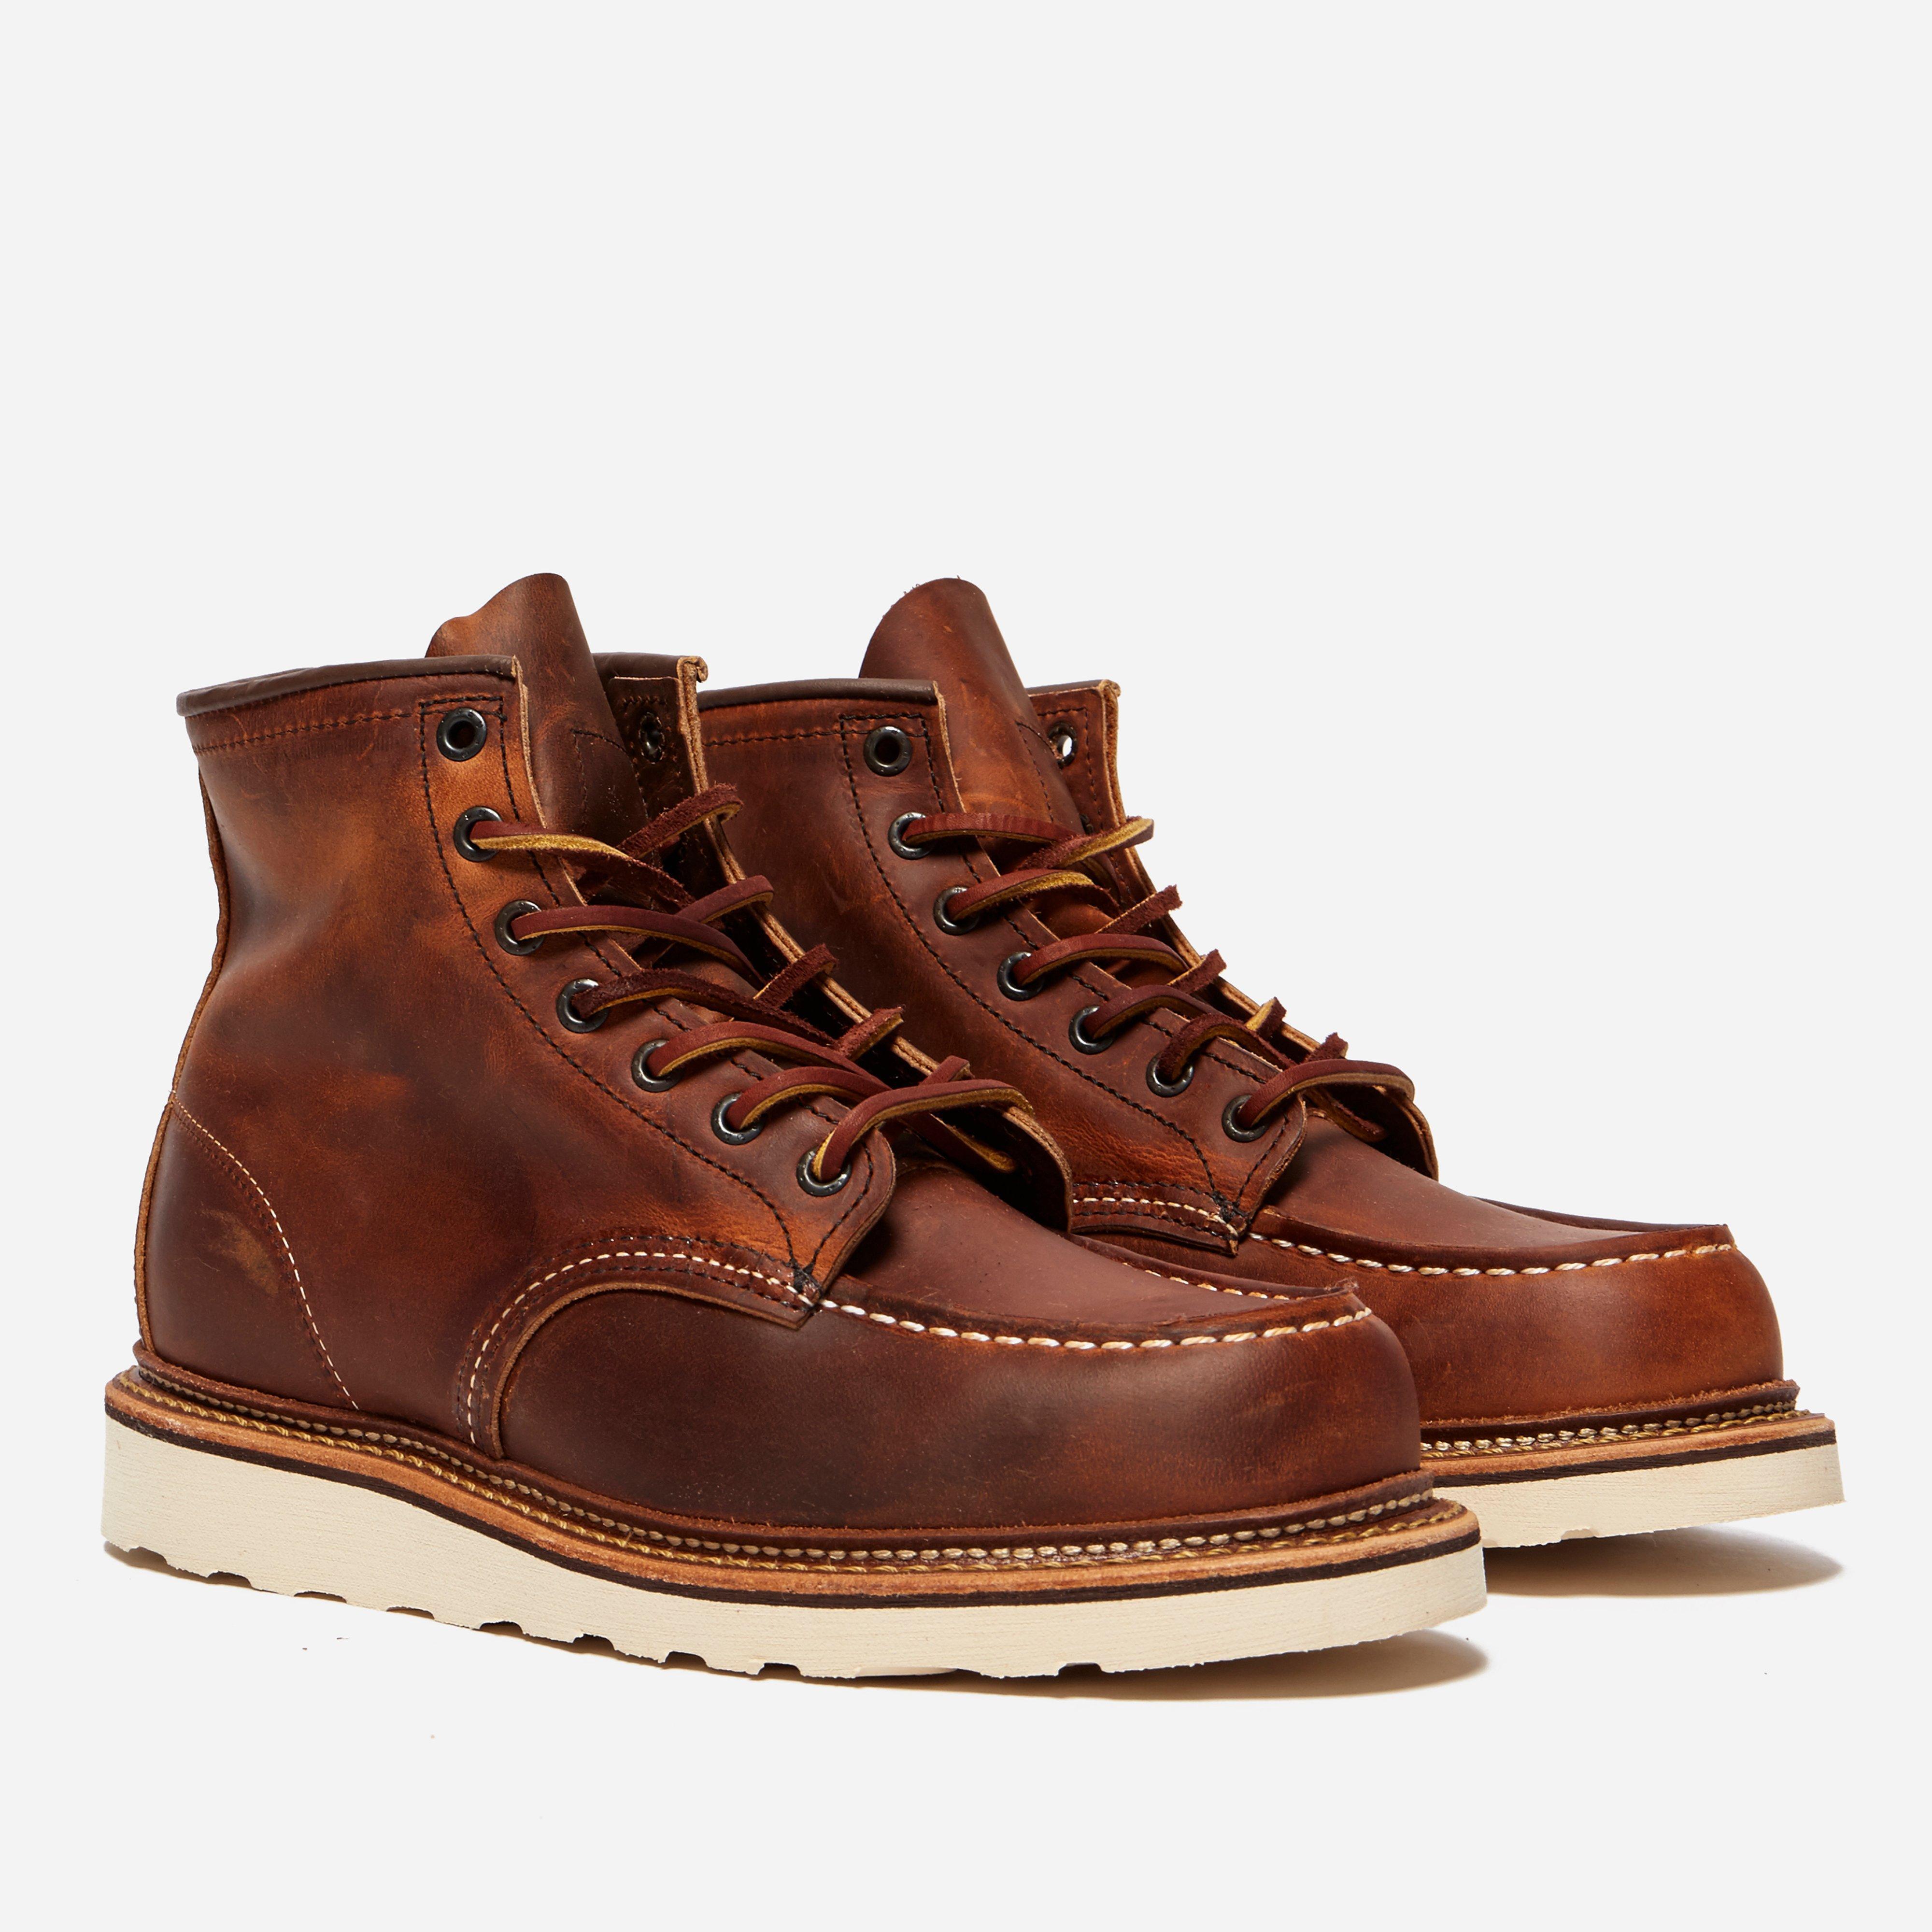 Lyst - Red Wing 1907 Moc Toe Boot in Brown for Men - Save 6%